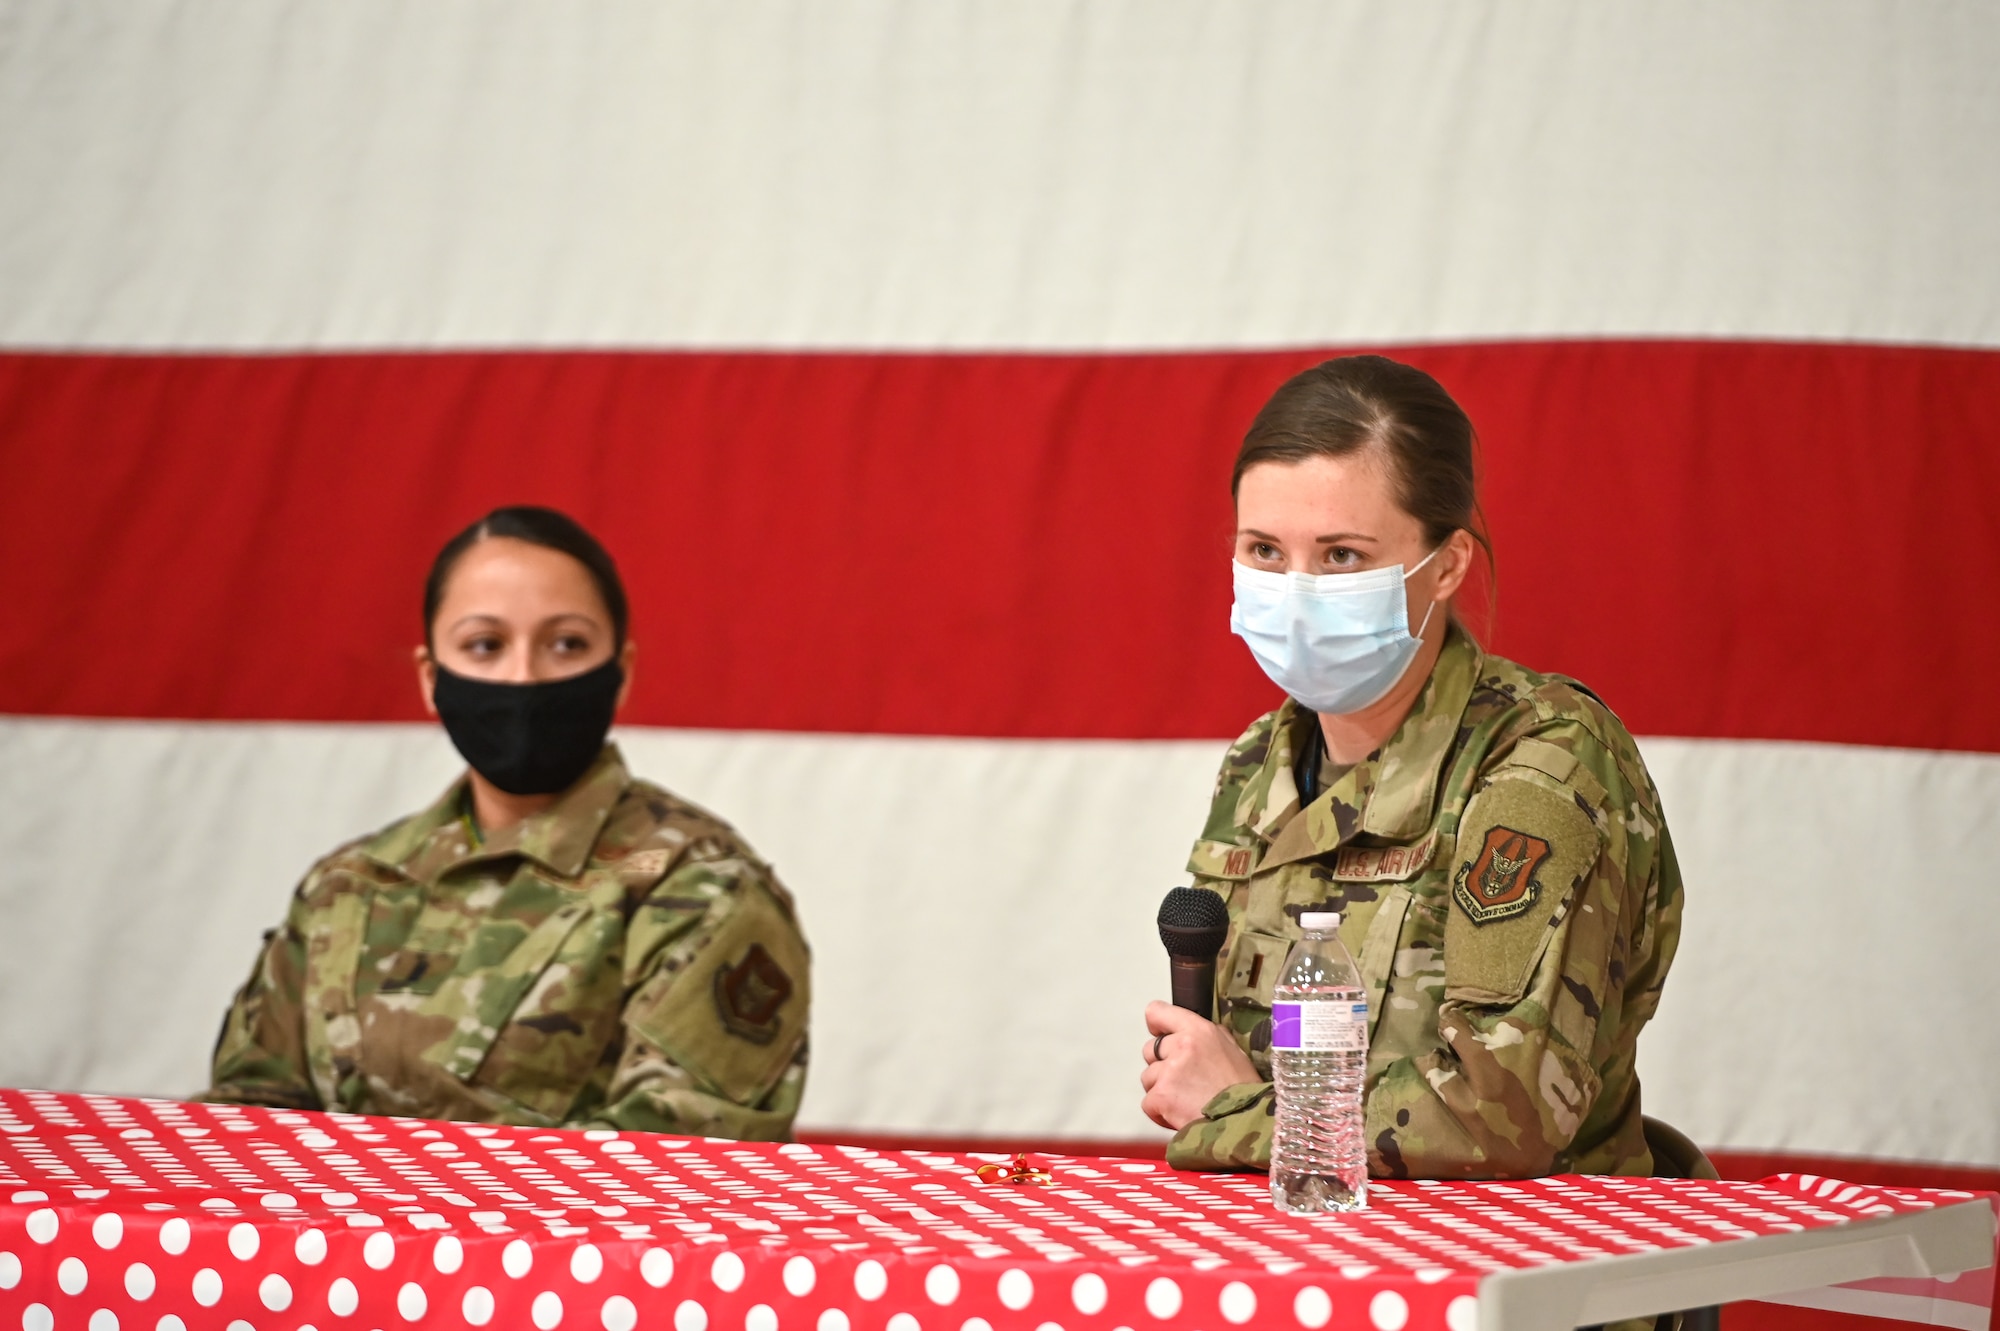 2nd Lt. Kassidi Nudd (right) and 2nd Lt. Michela Infantino, both reservists in the 419th Fighter Wing, speak at a International Women's Day panel, March 8, 2021, held at Hill Air Force Base, Utah.